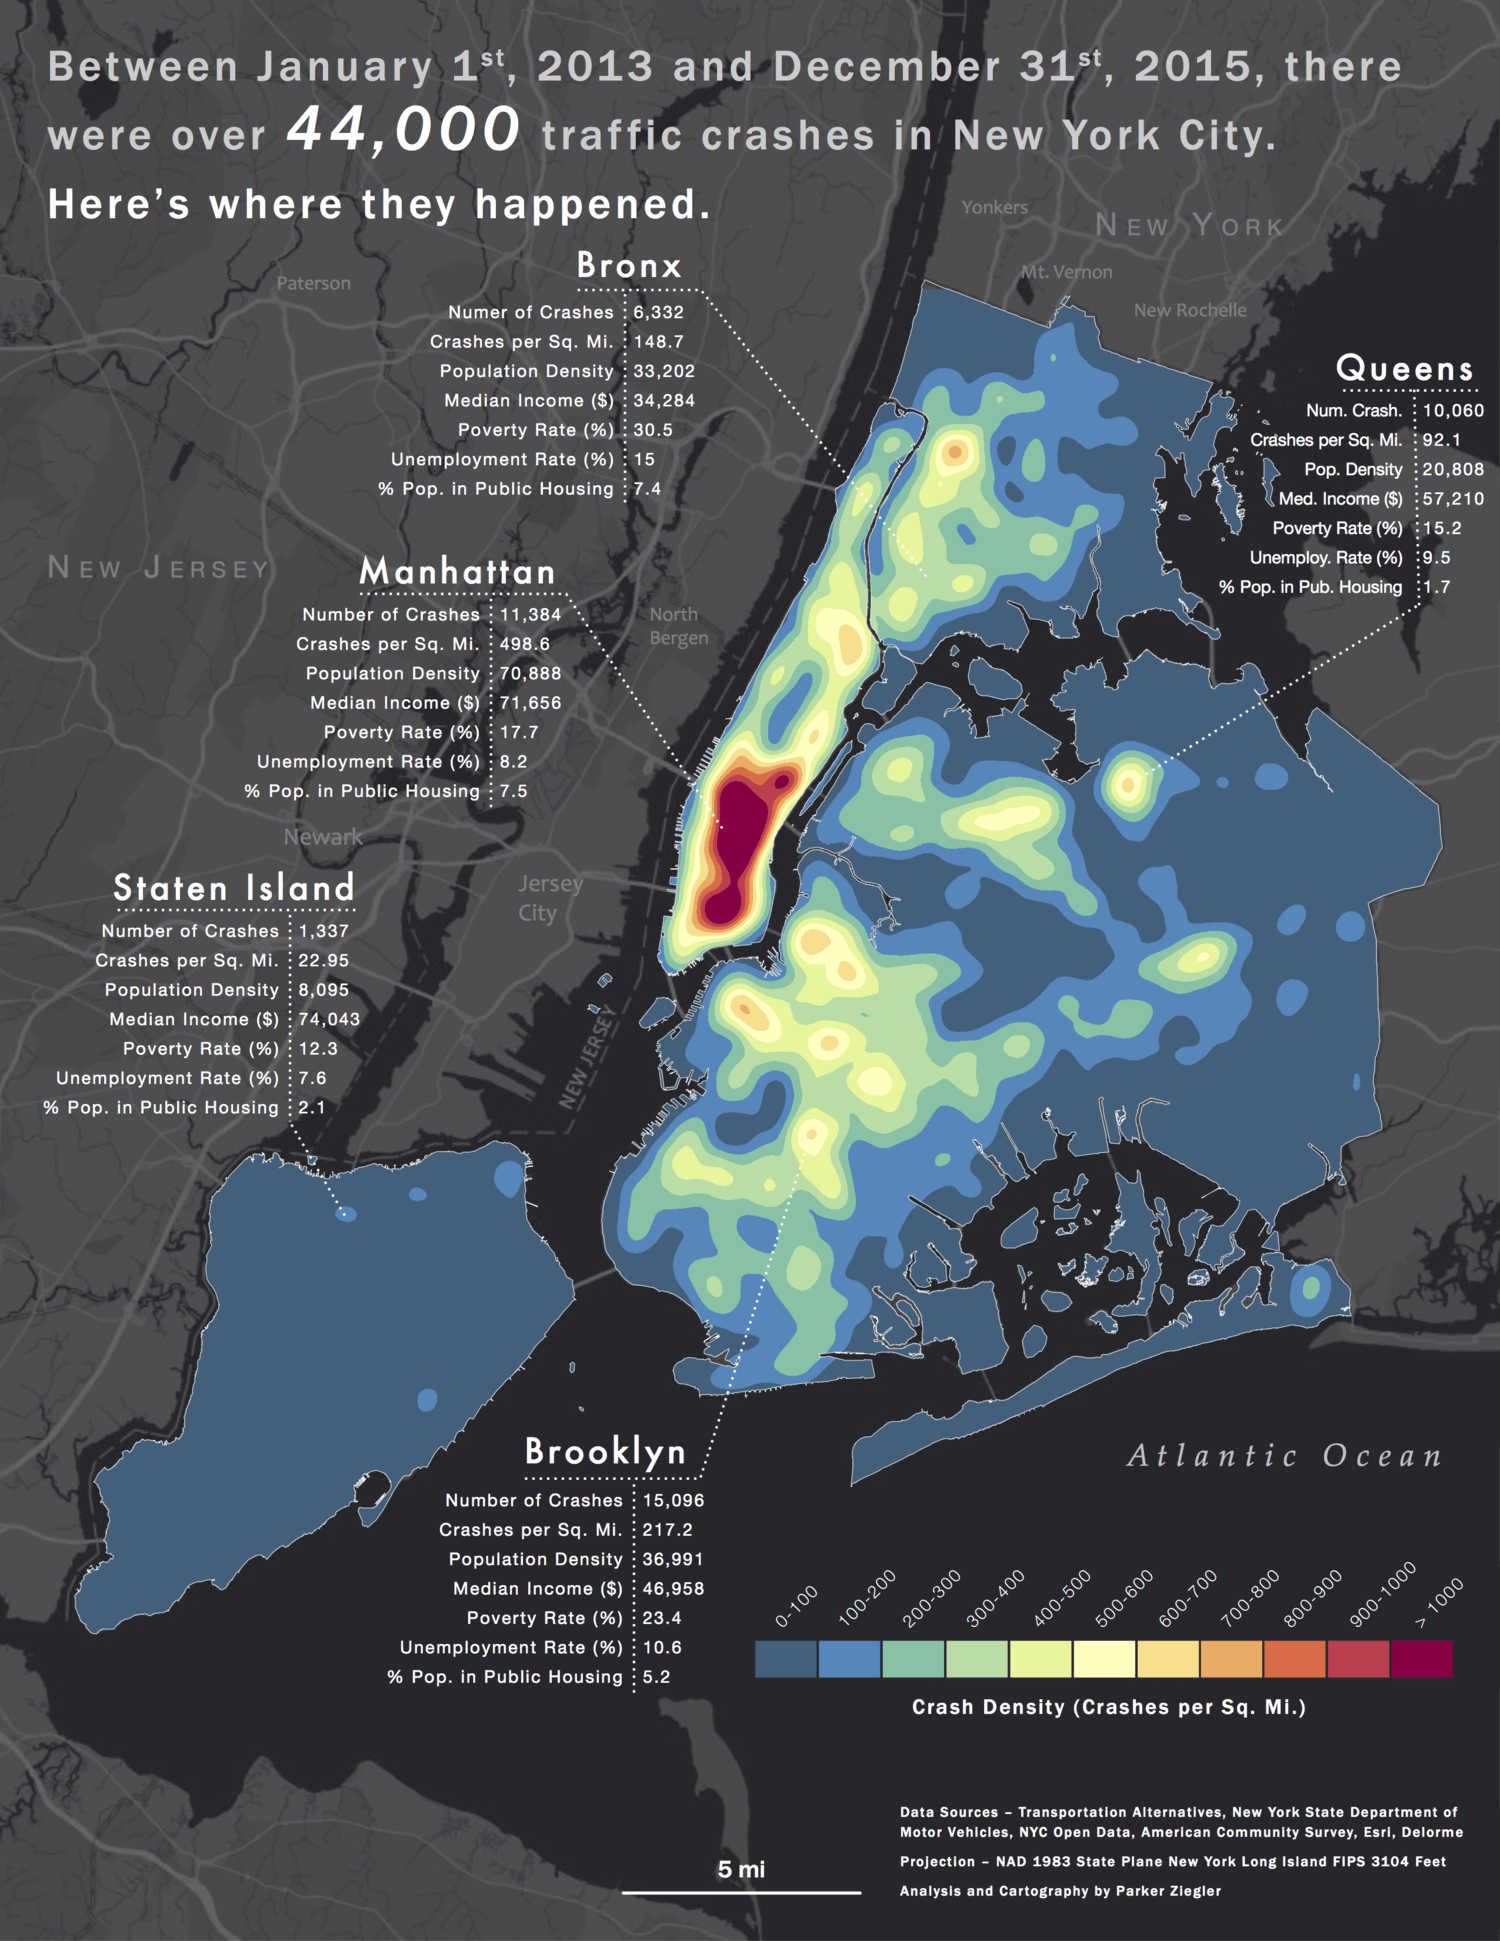 A heat map of traffic crashes in New York City between 2013 and 2015.